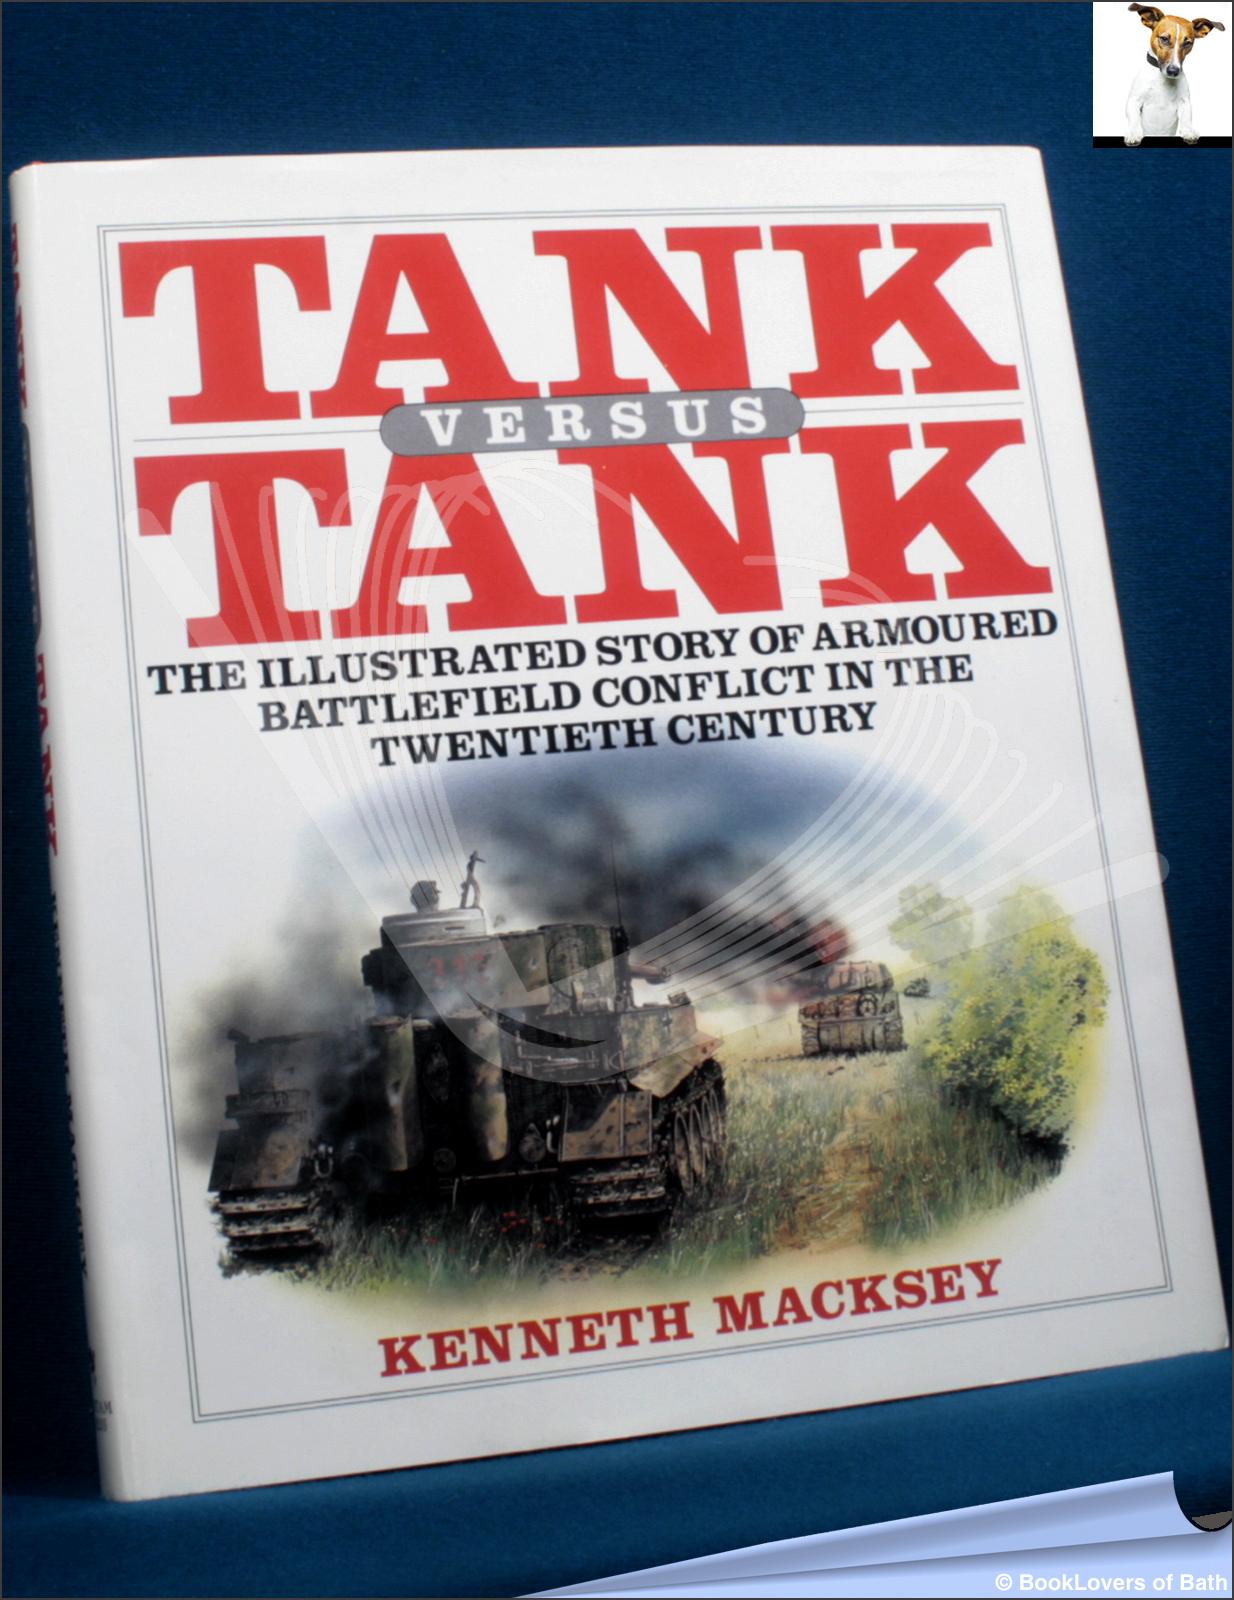 Tank Versus Tank: The Illustrated Story of Armoured Battlefield Conflict in the Twentieth Century - Kenneth Macksey